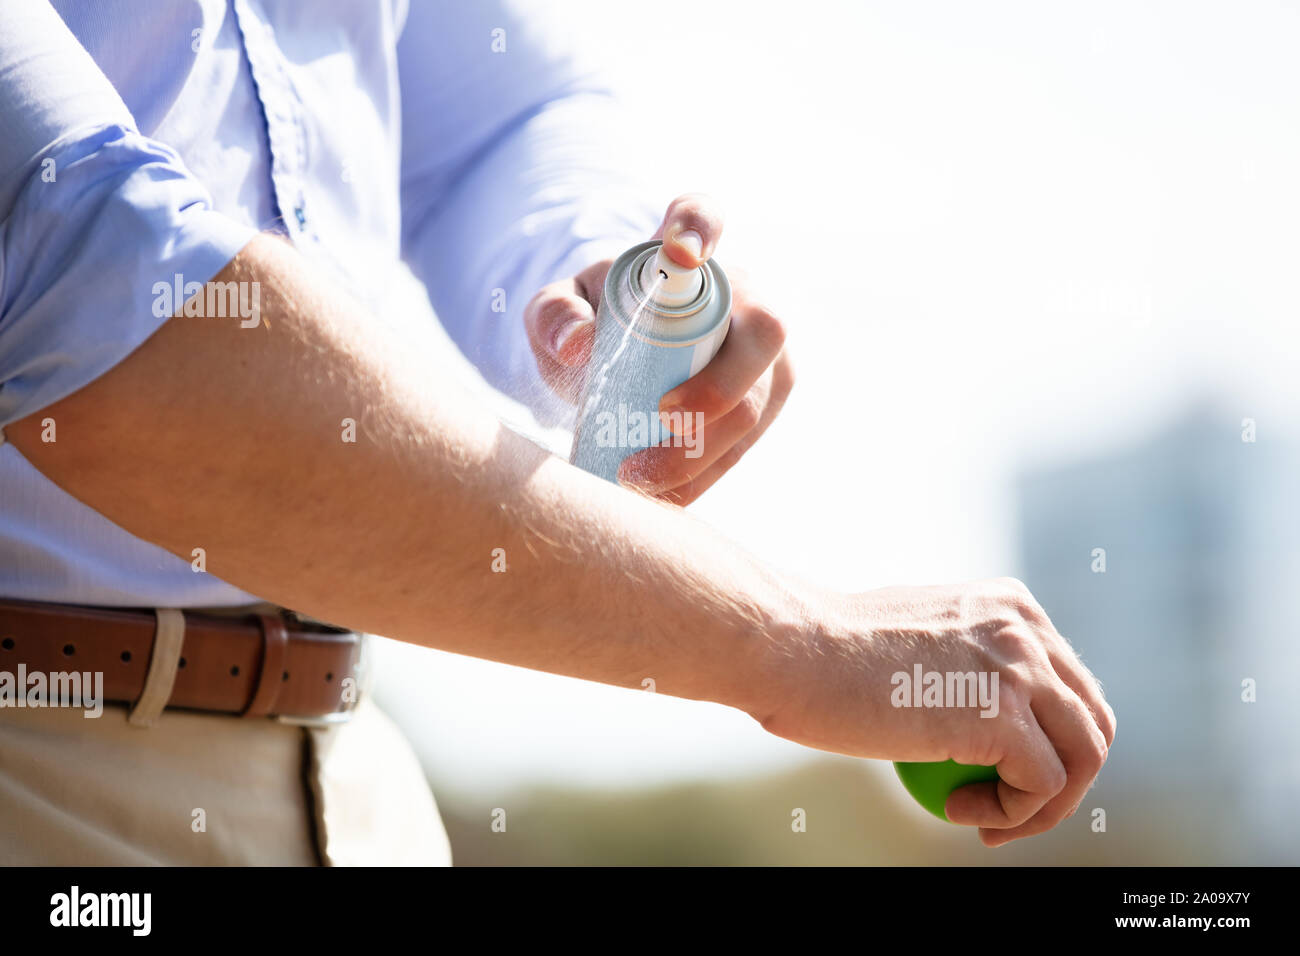 Man Spraying Anti Insect Deet Spray On Skin Over His Arm Outdoors Stock Photo